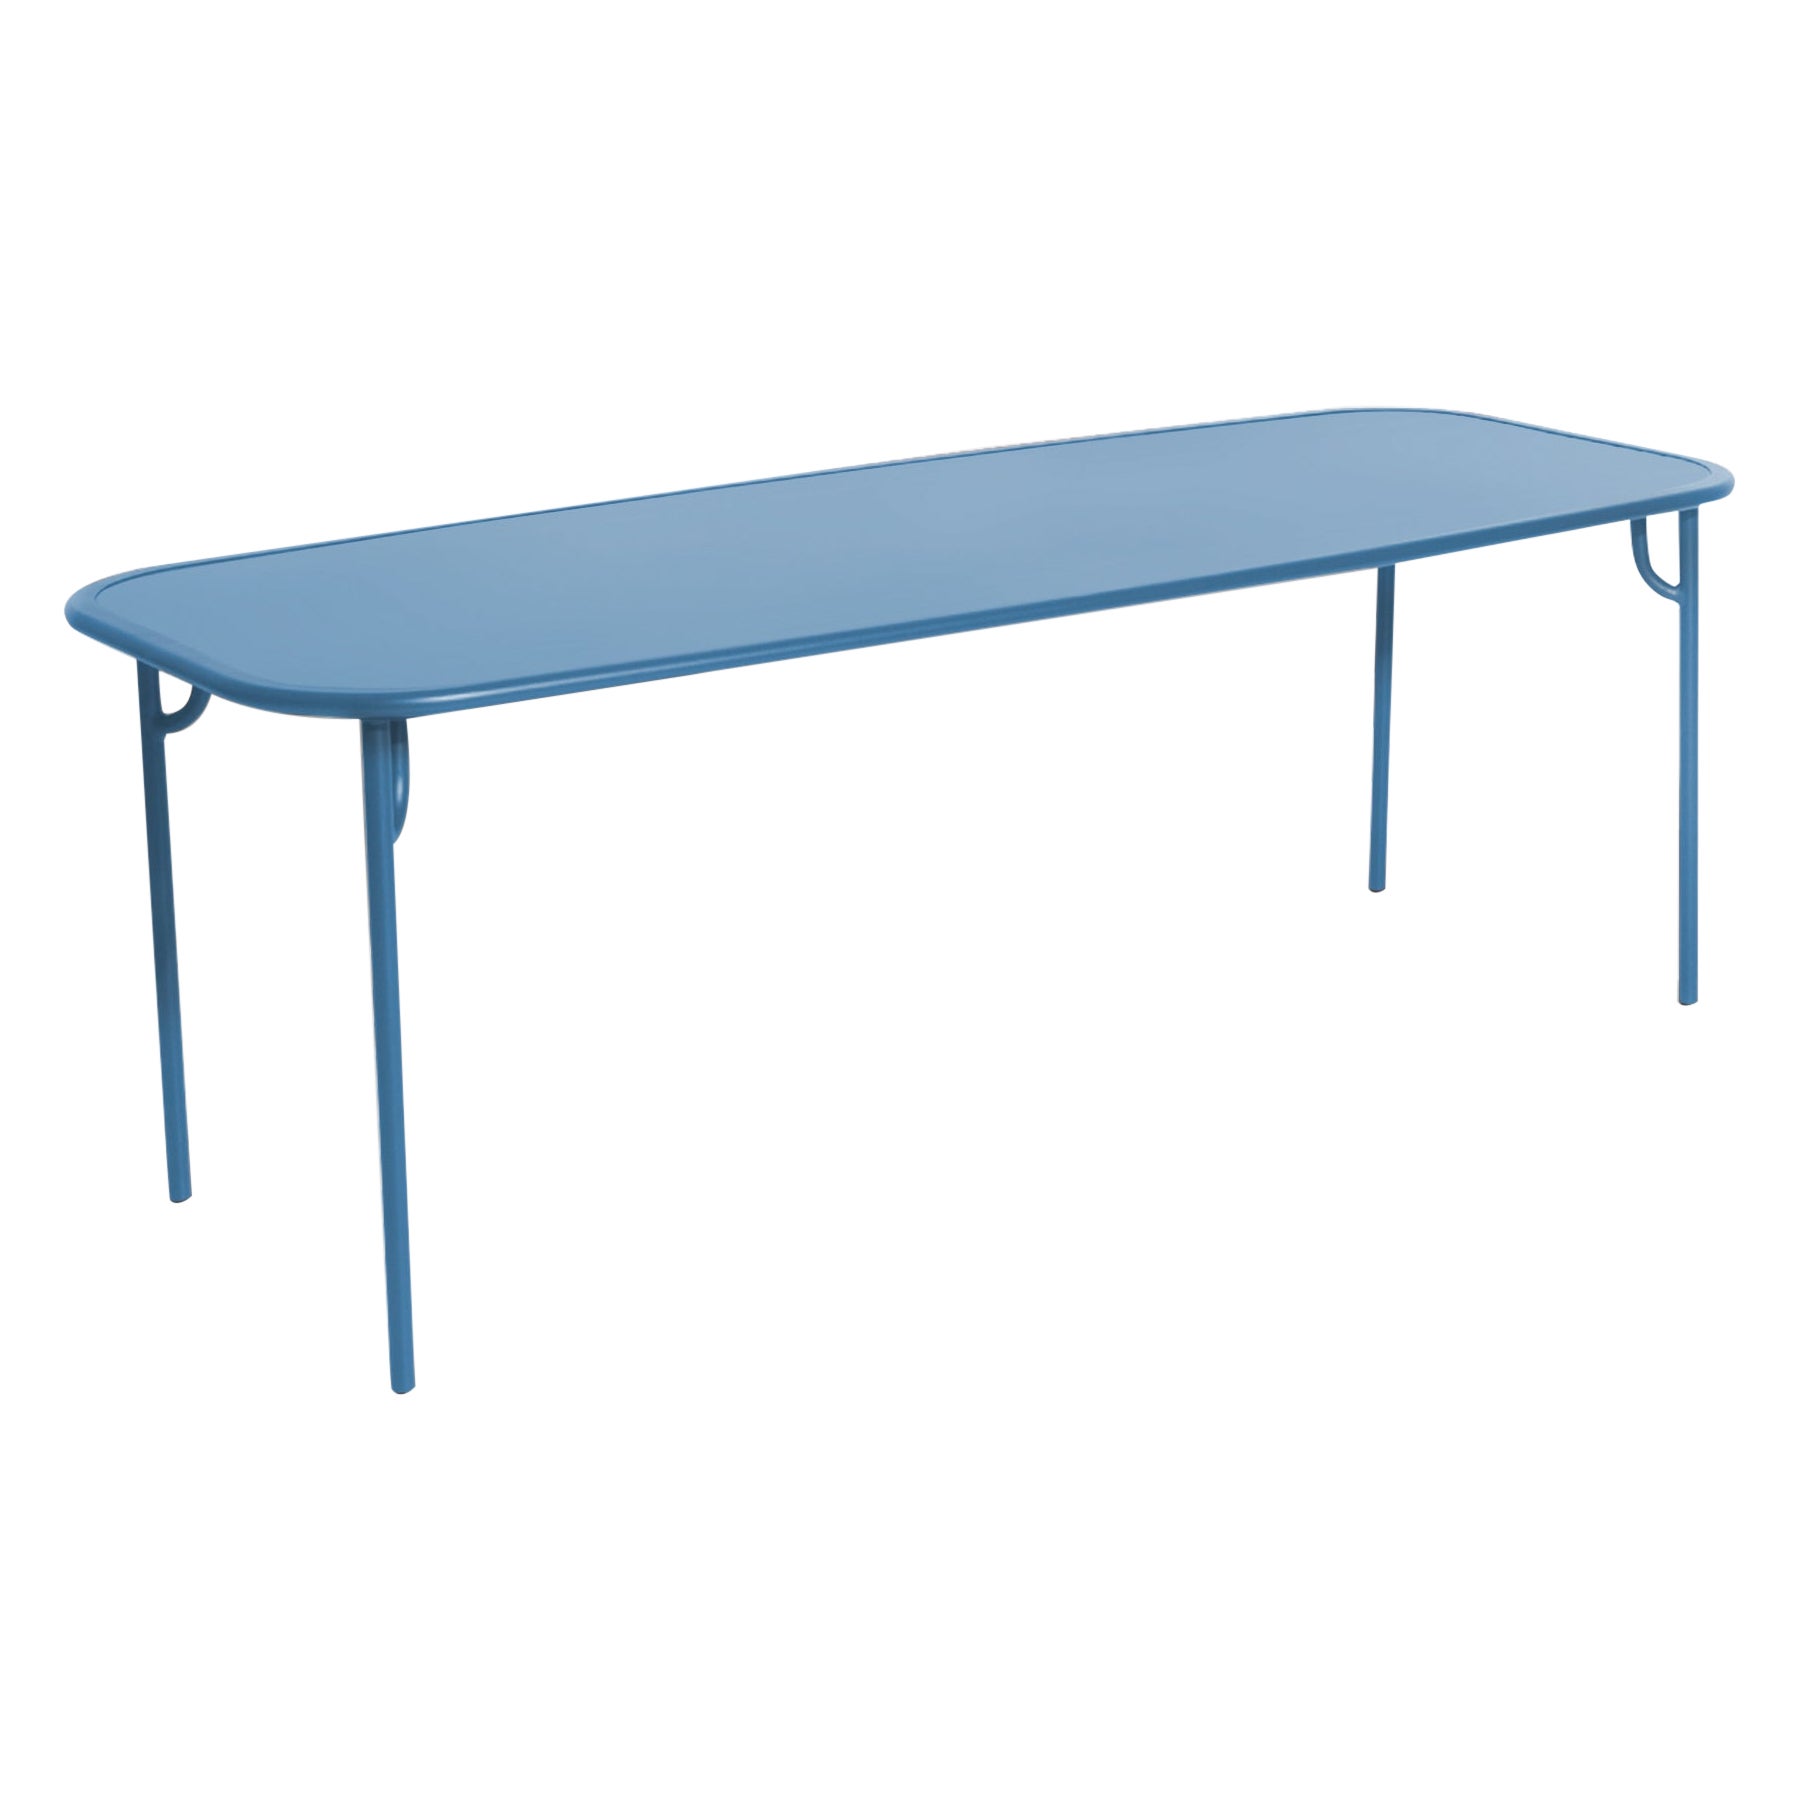 Petite Friture Week-End Large Plain Rectangular Dining Table in Azur Blue For Sale